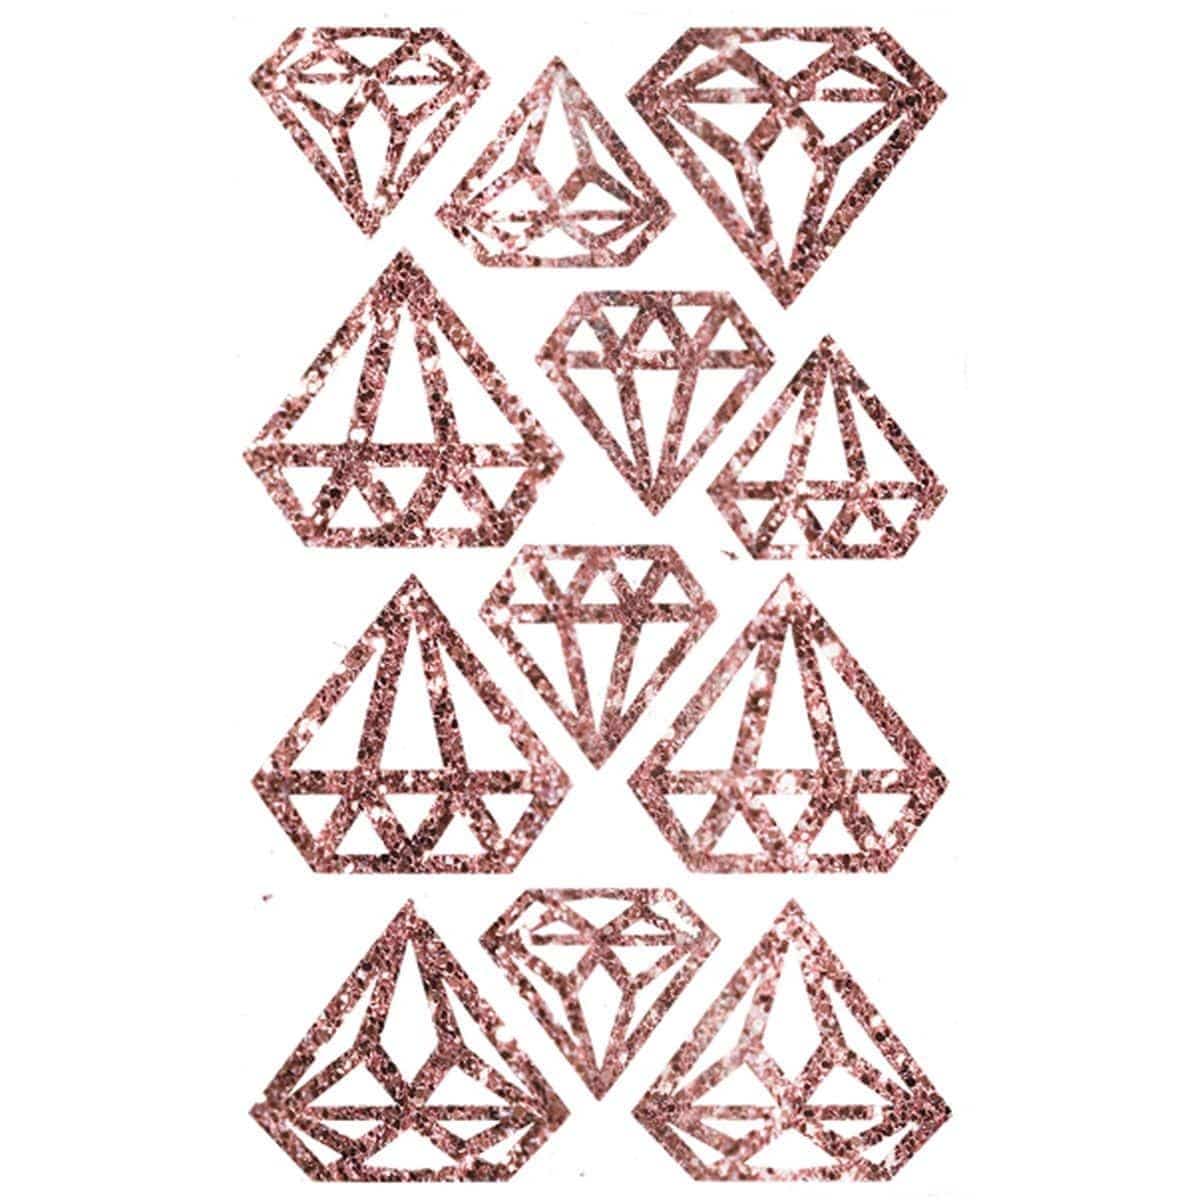 Buy Wedding Stickers - Diamond - Rose Gold sold at Party Expert